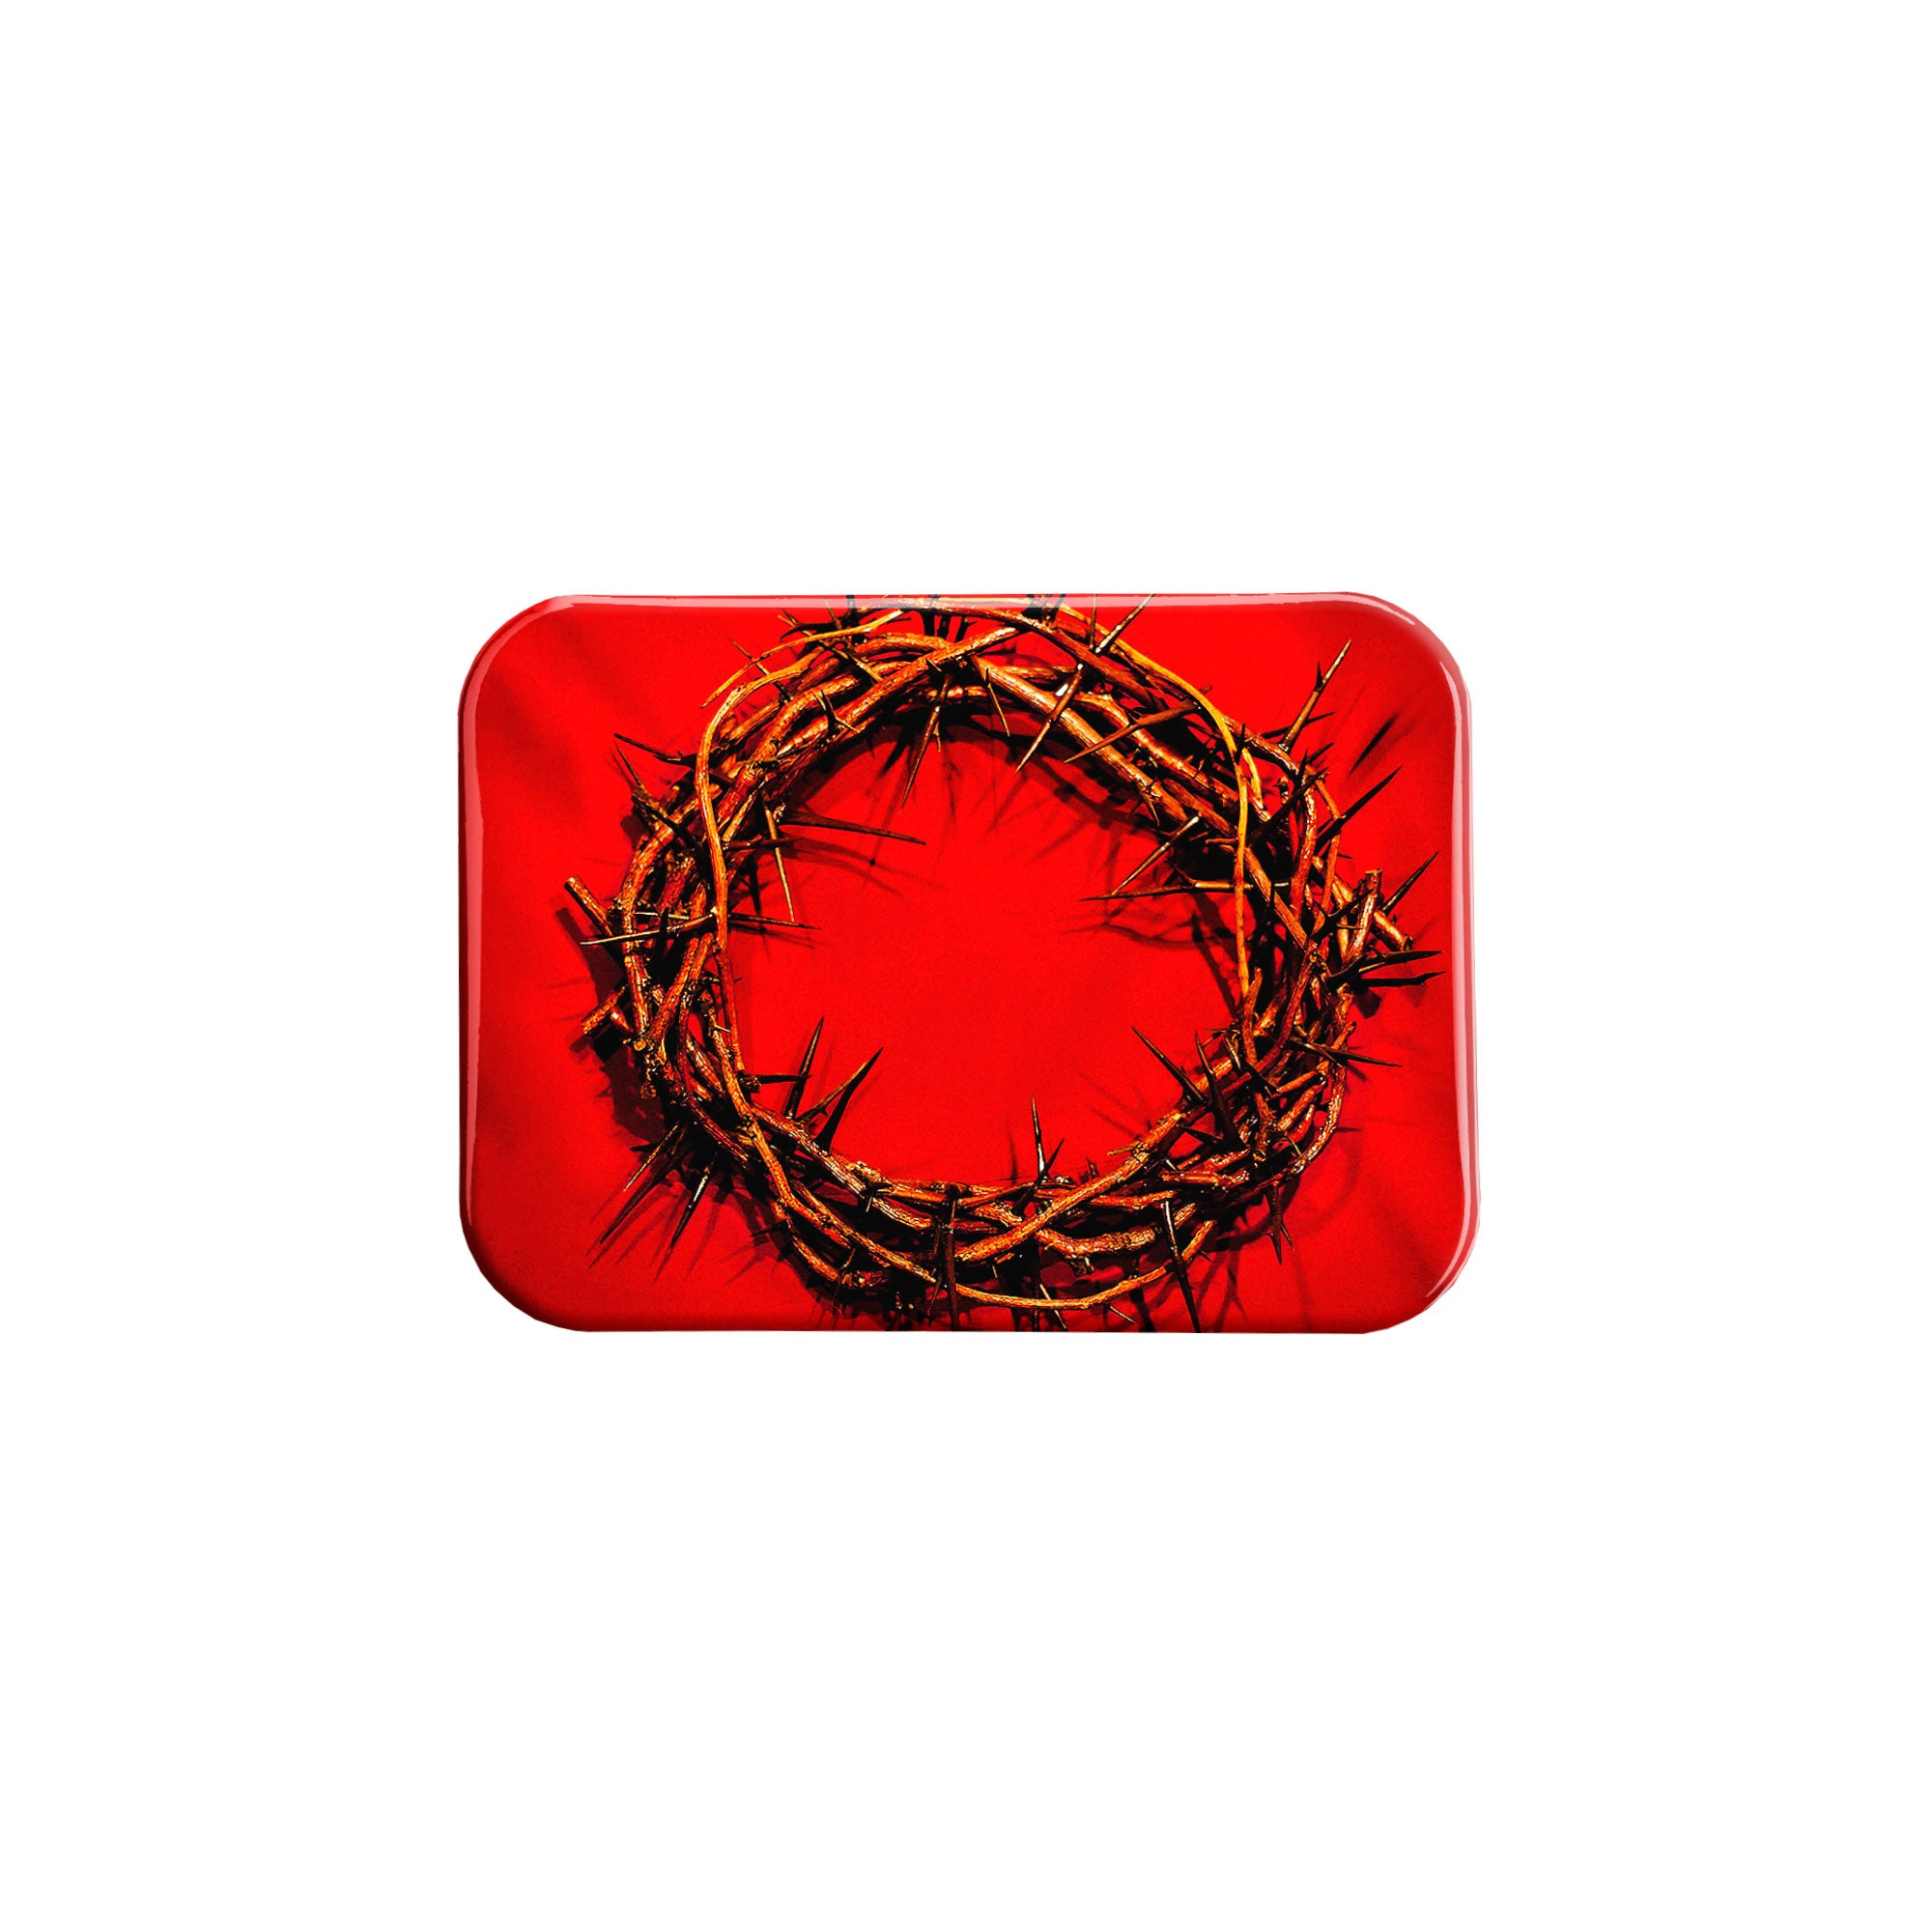 "Crown of Thorns" - 2.5" X 3.5" Rectangle Fridge Magnets